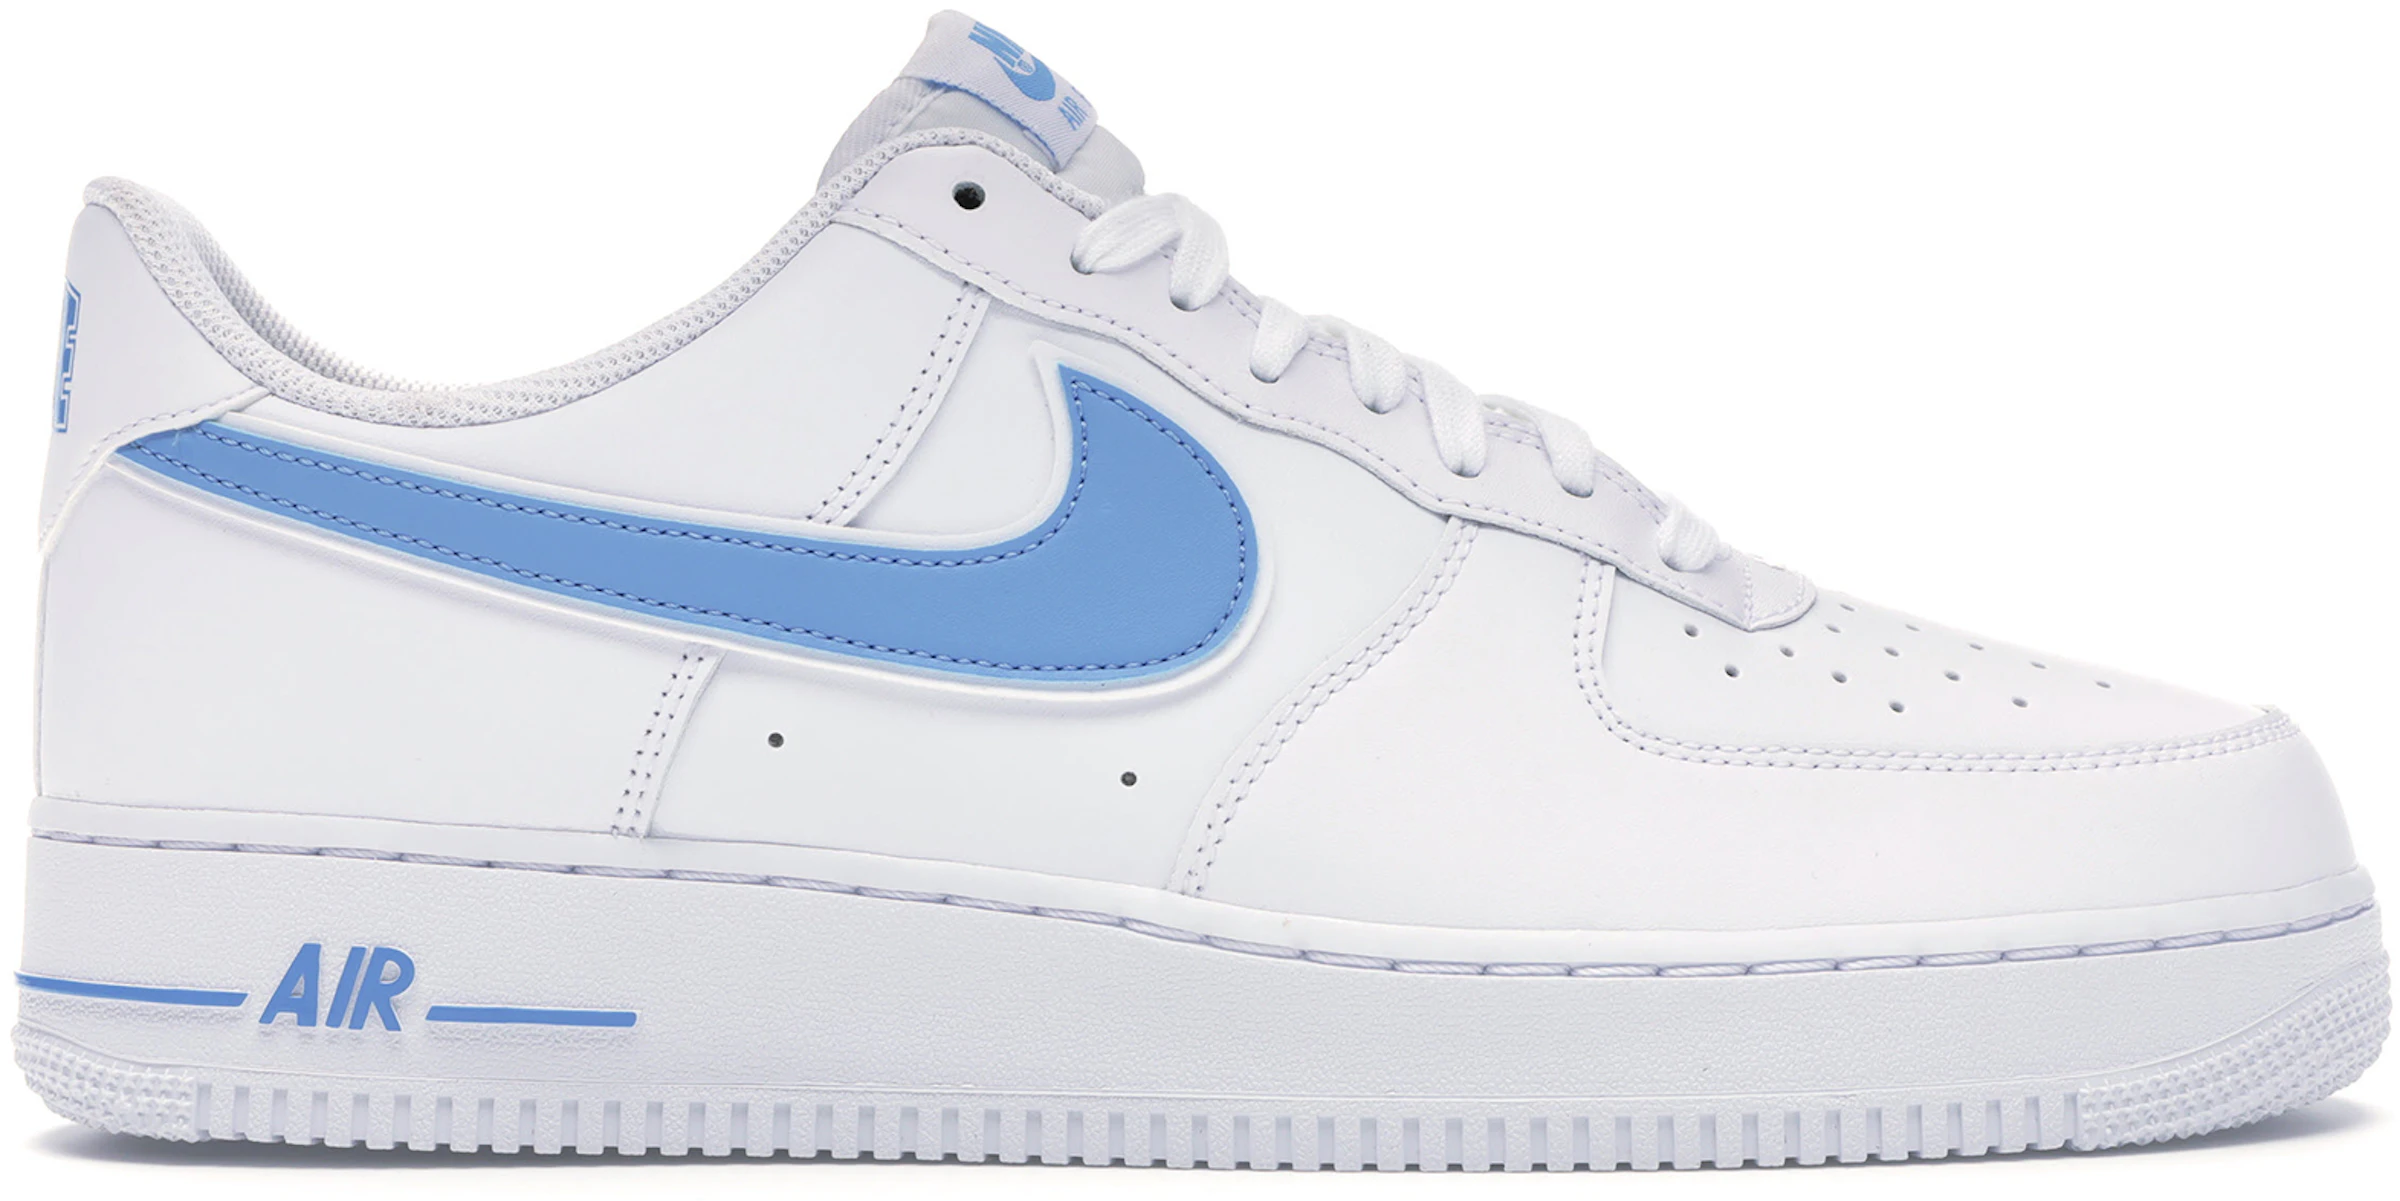 Nike Air Force Low White University Blue - AO2423-100 - ES